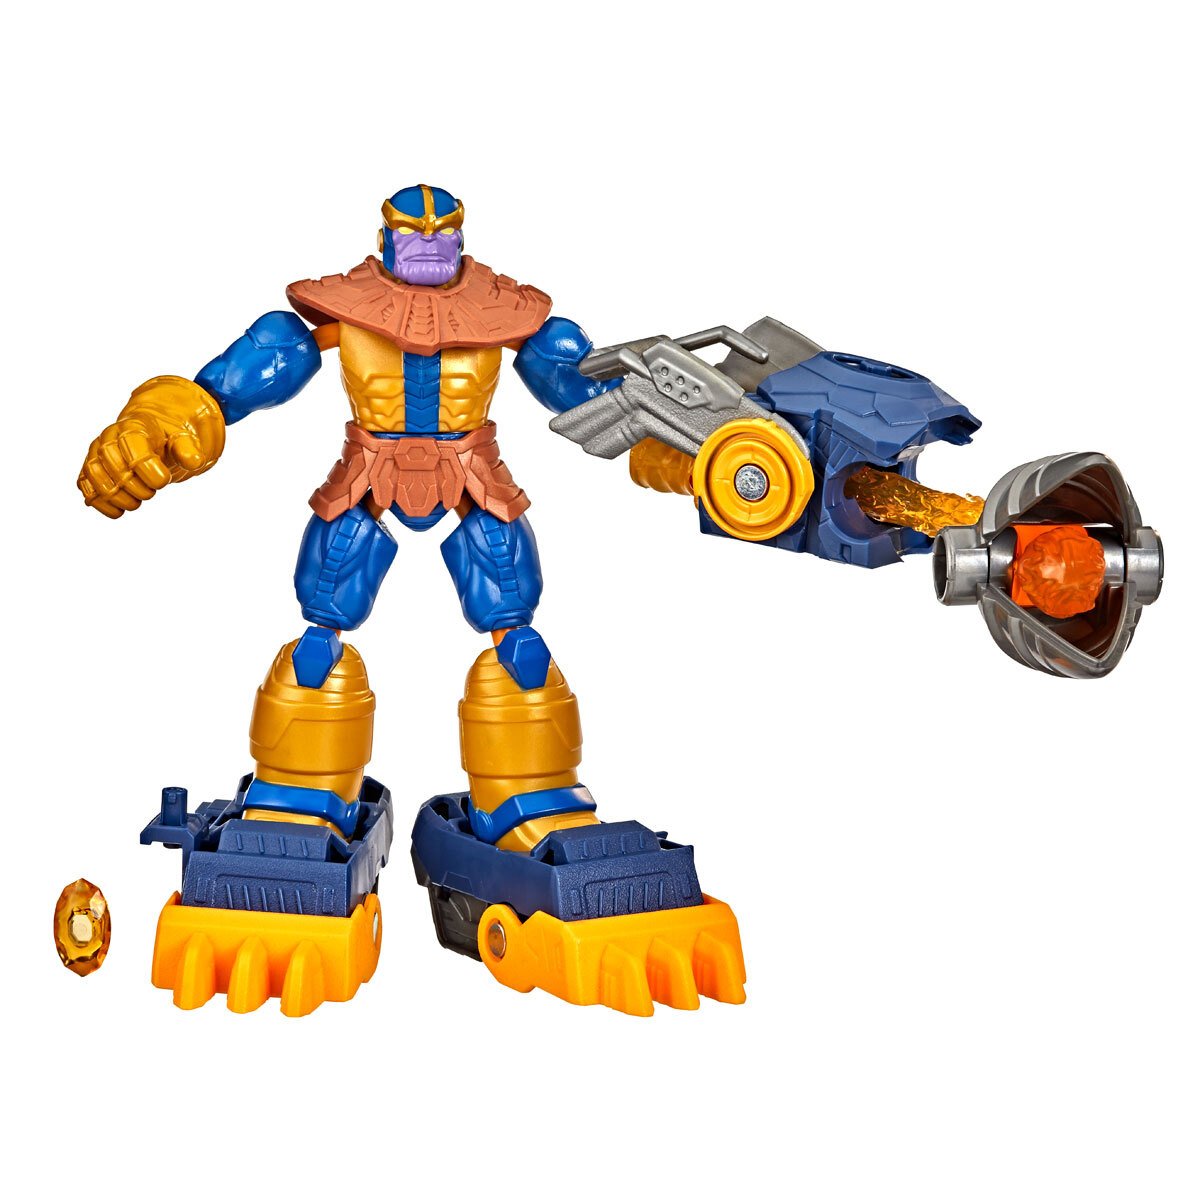 Marvel Avengers Bend and Flex Missions - Thanos 15cm Fire Mission Action Figure